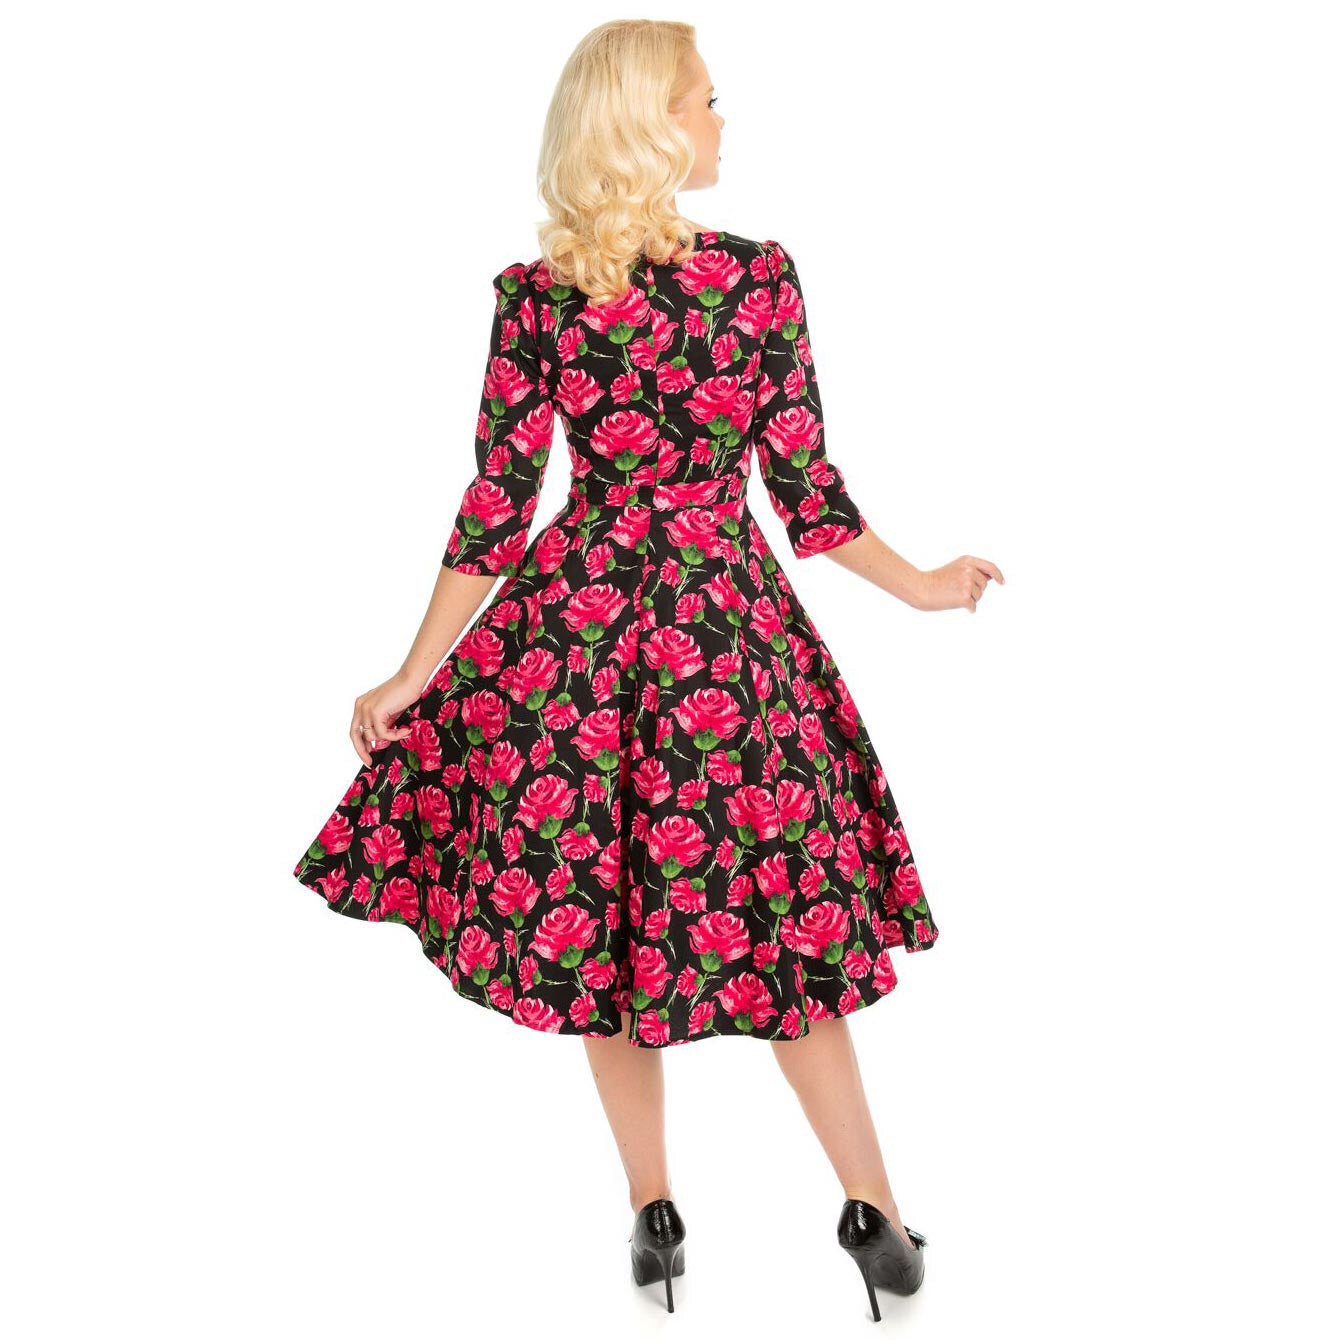 Vintage Black Red Rose Floral Print 3/4 Sleeve 50s Swing Dress - Pretty Kitty Fashion